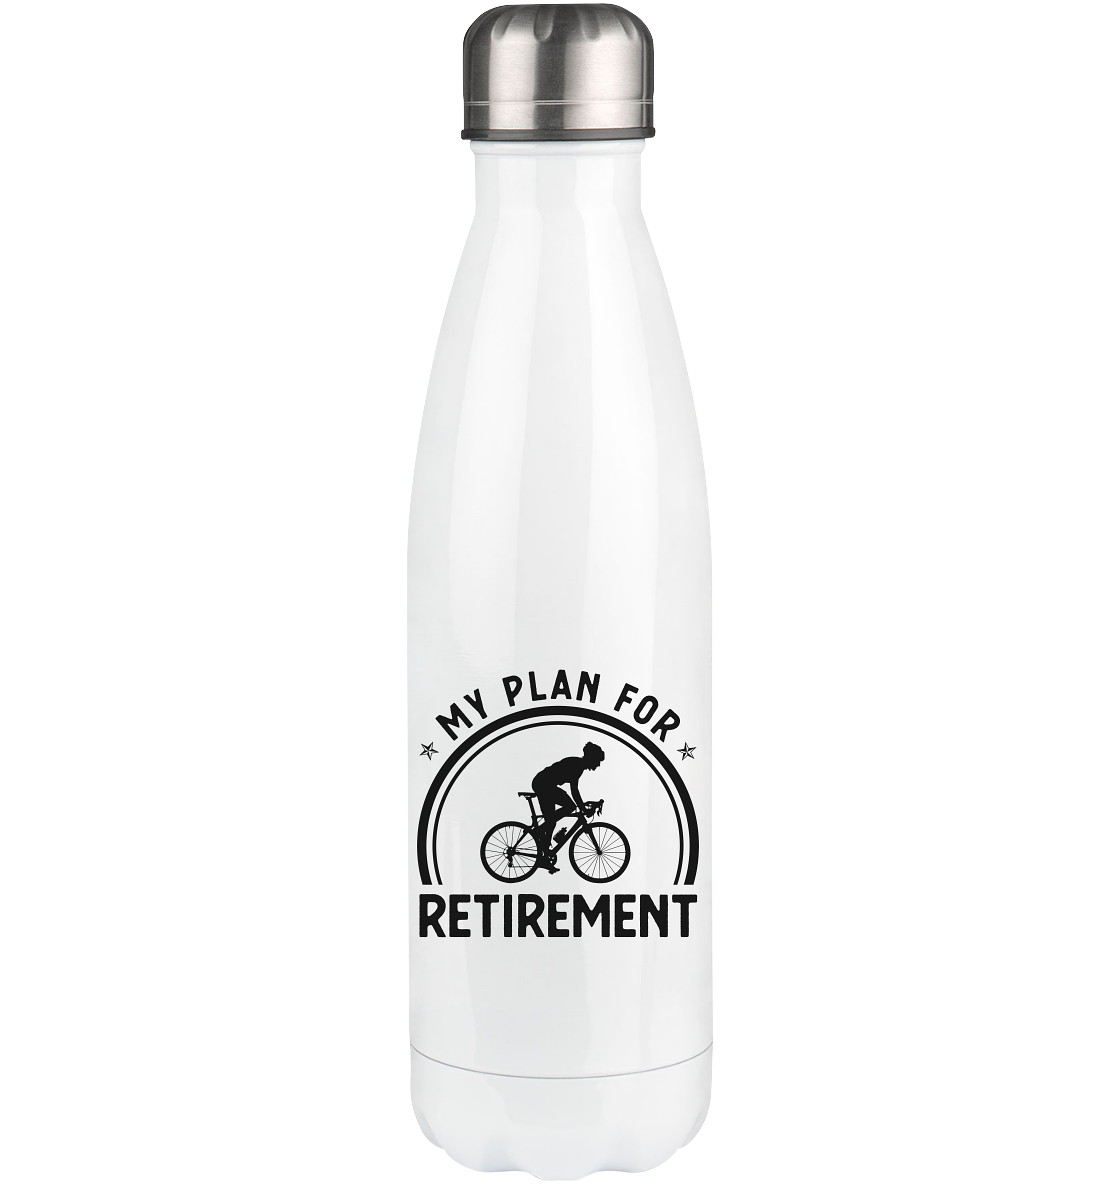 My Plan For Retirement 1 - Edelstahl Thermosflasche fahrrad 500ml